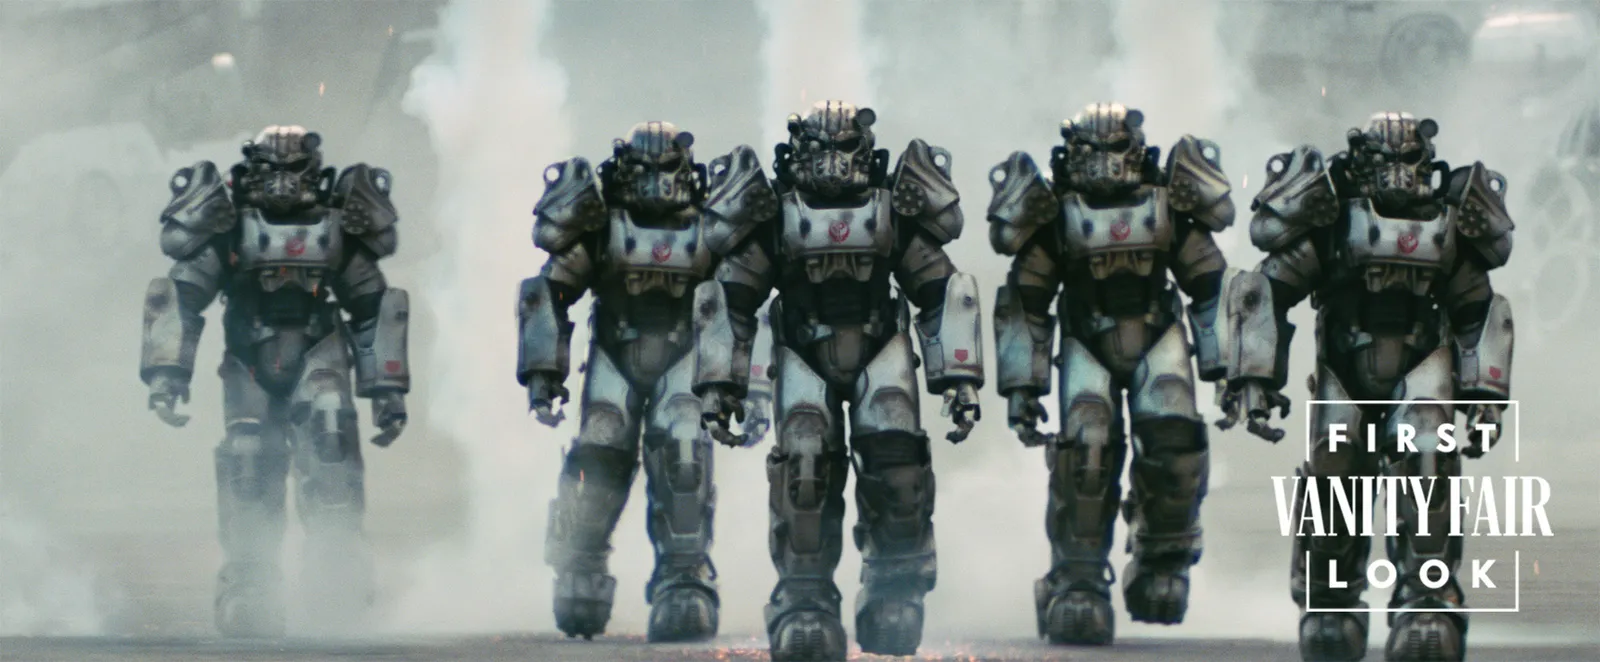 A squad of power armor-wielding characters from the Fallout TV series.